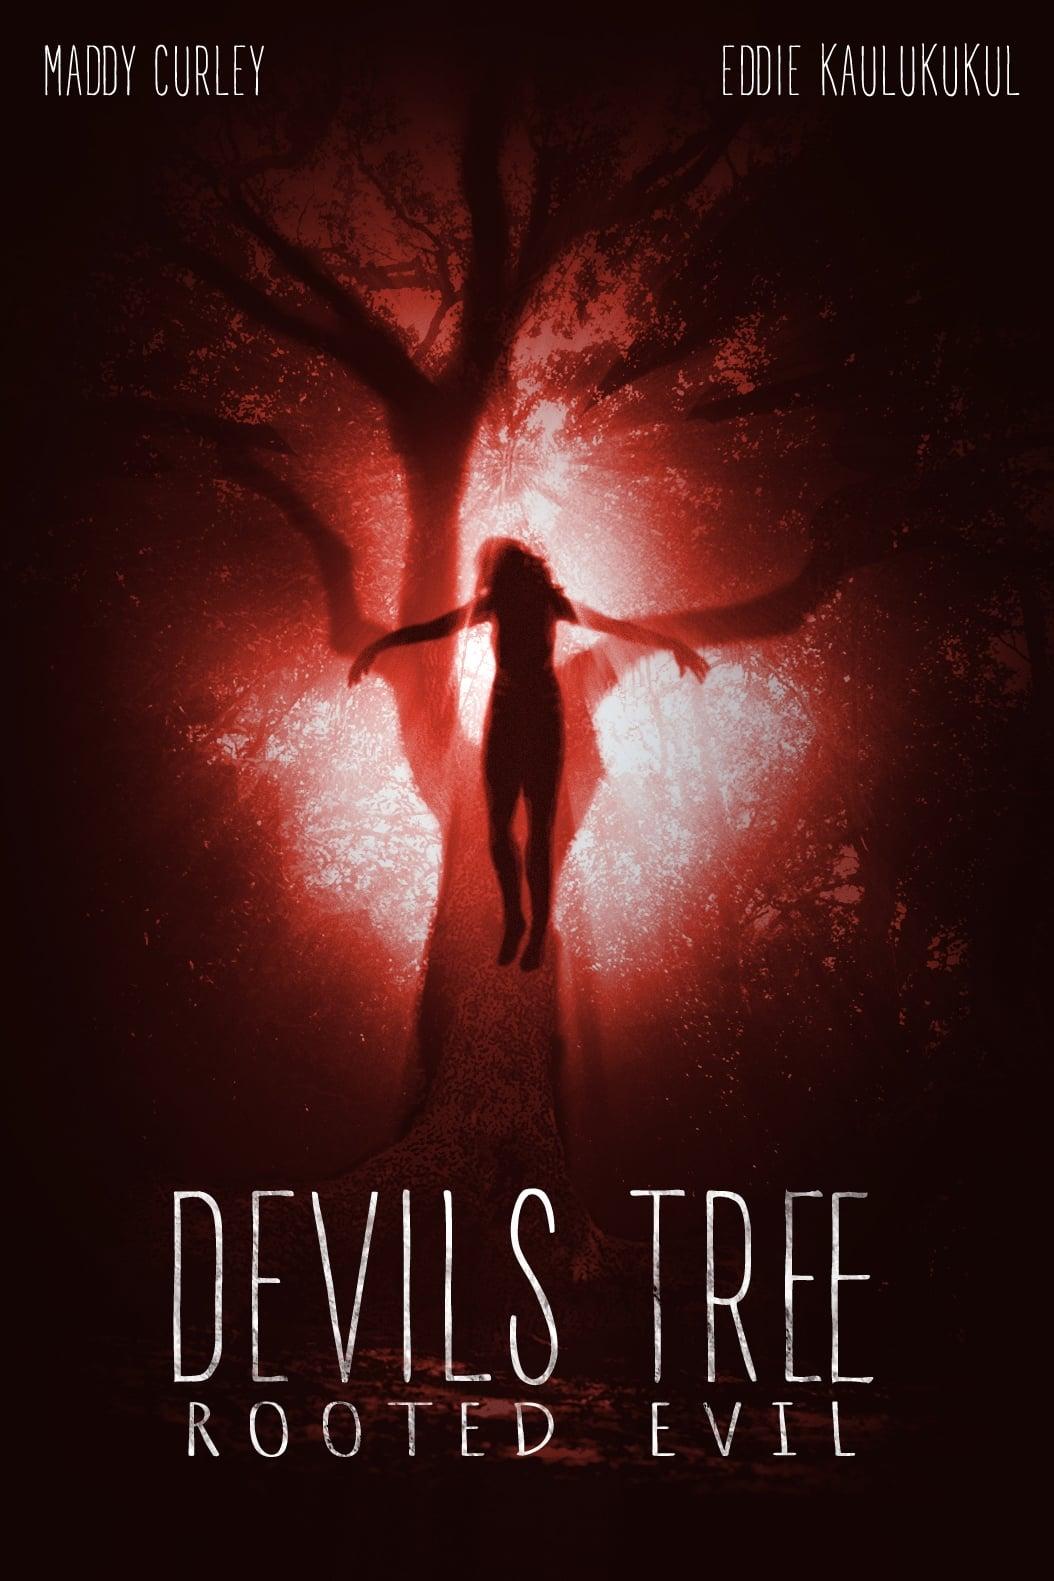 Devil's Tree: Rooted Evil poster